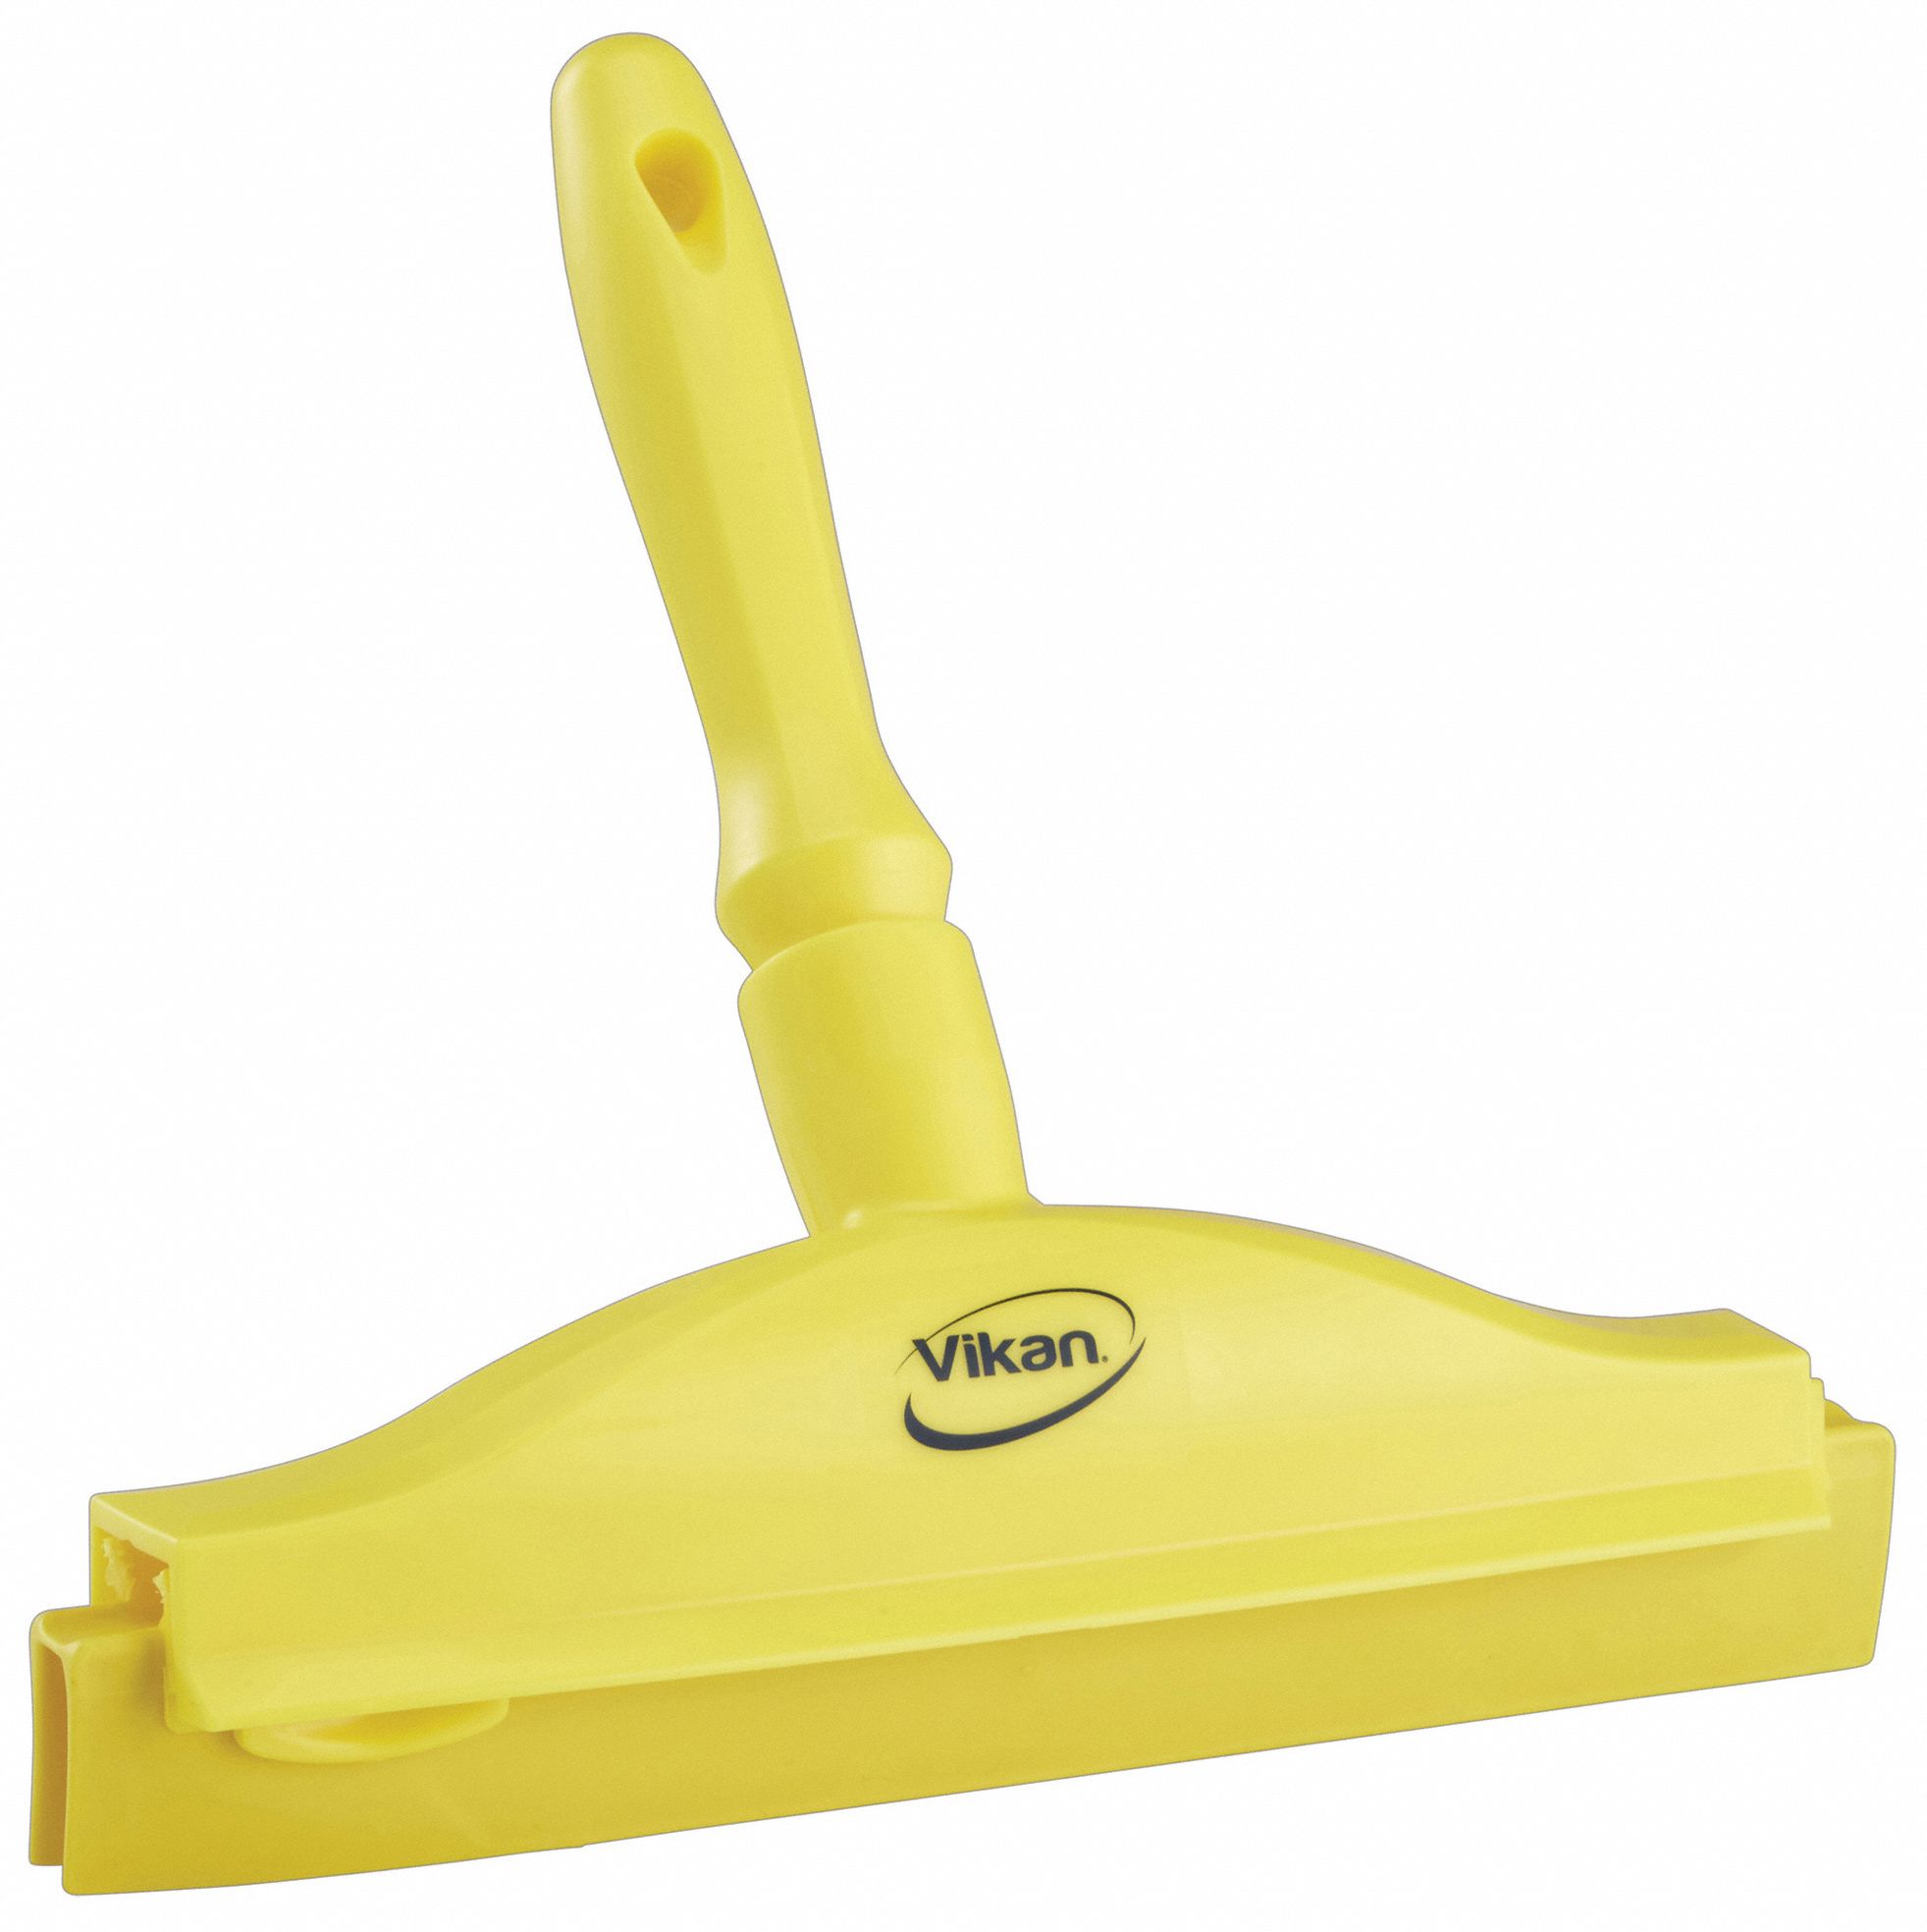 Vikan 77116 10 Double Blade Ultra Hygiene Squeegee, Yellow